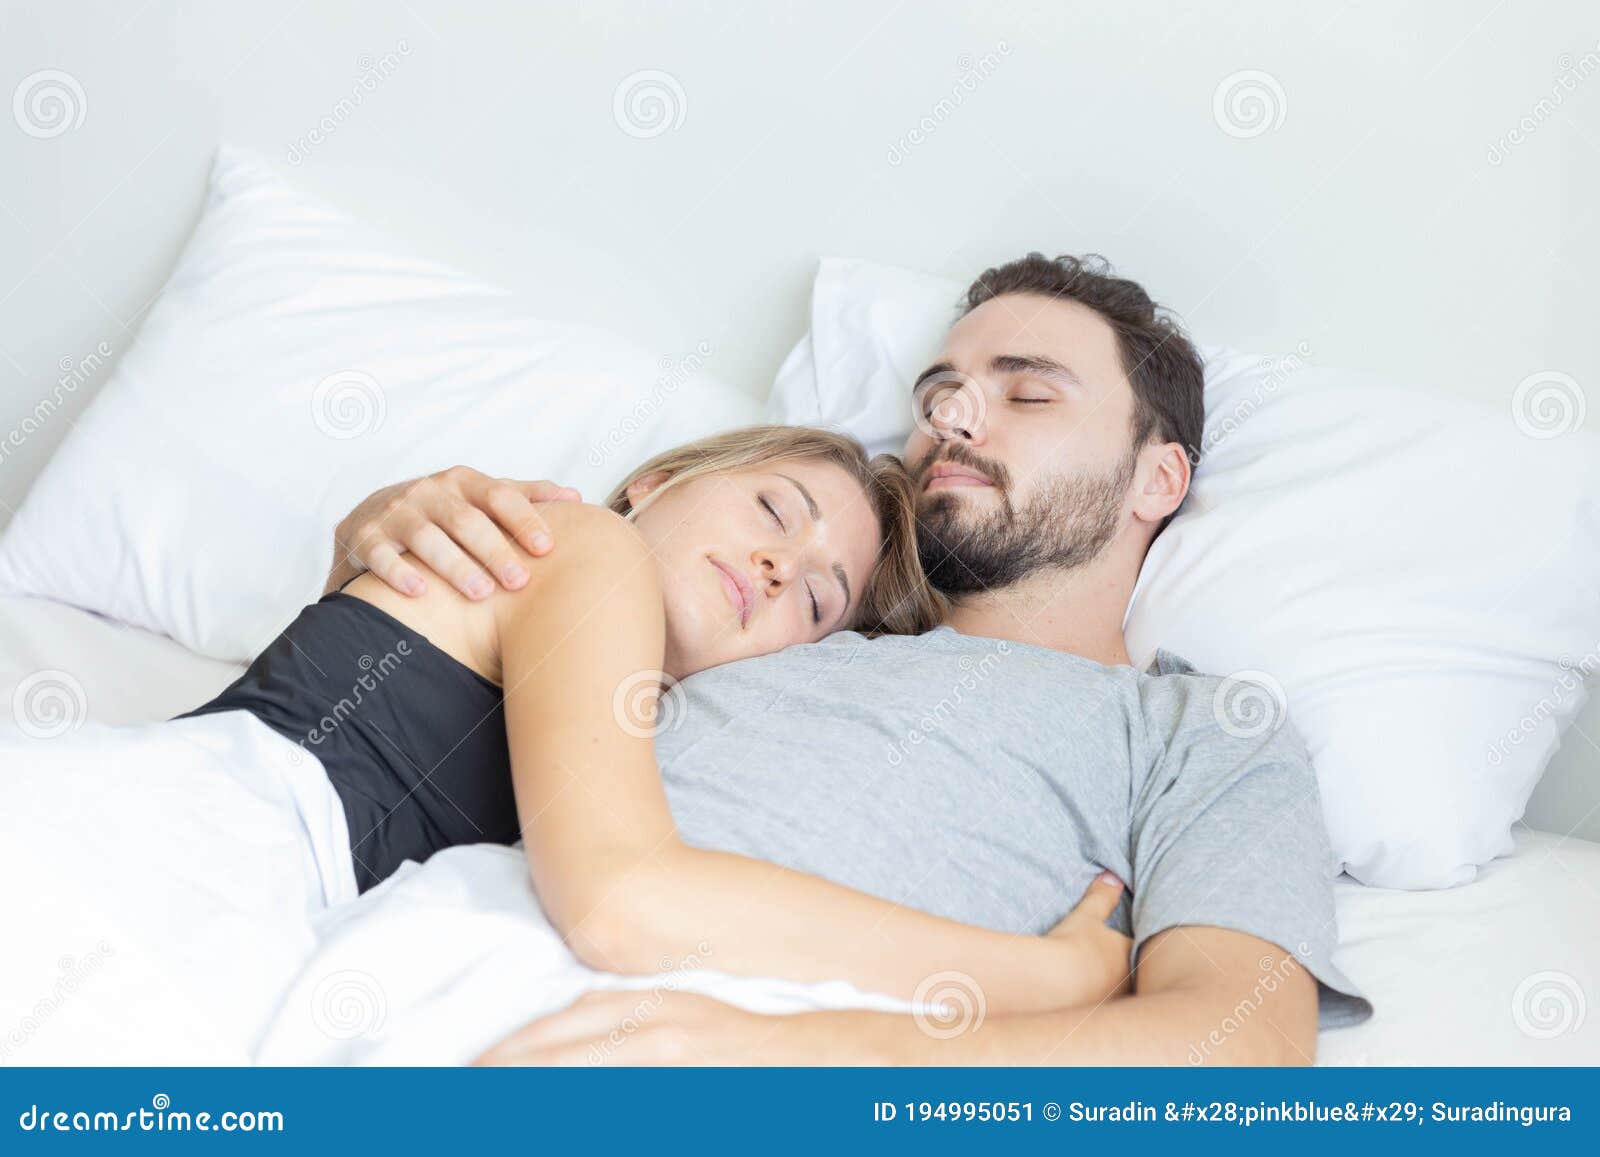 Young Cute Couple Hug and Sleep Together in Bed Stock Image ...